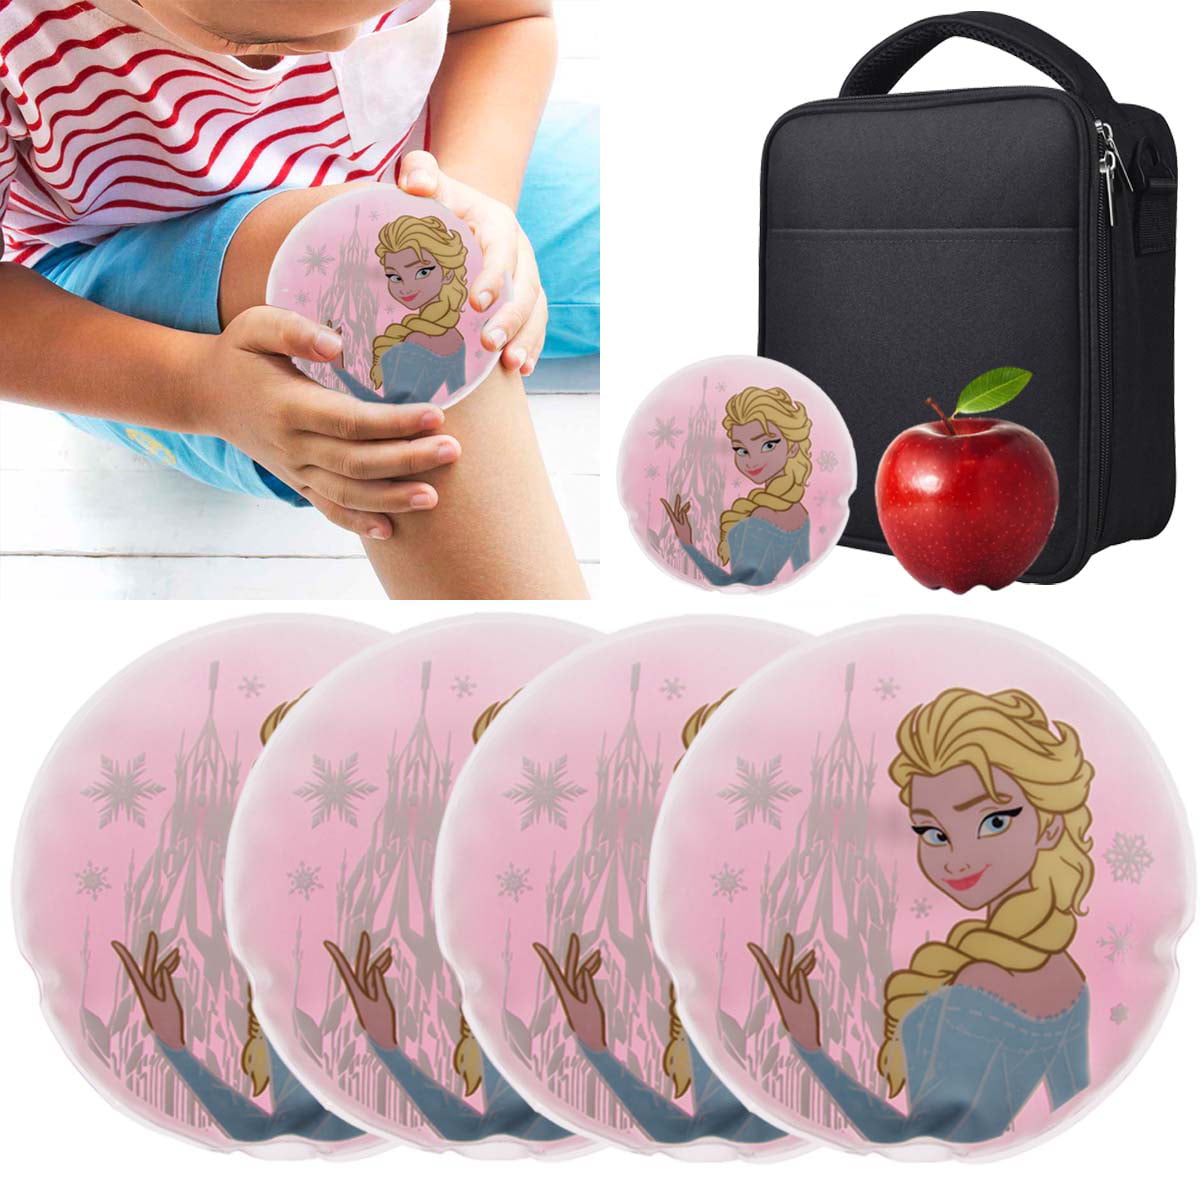 gel ice packs for lunch boxes